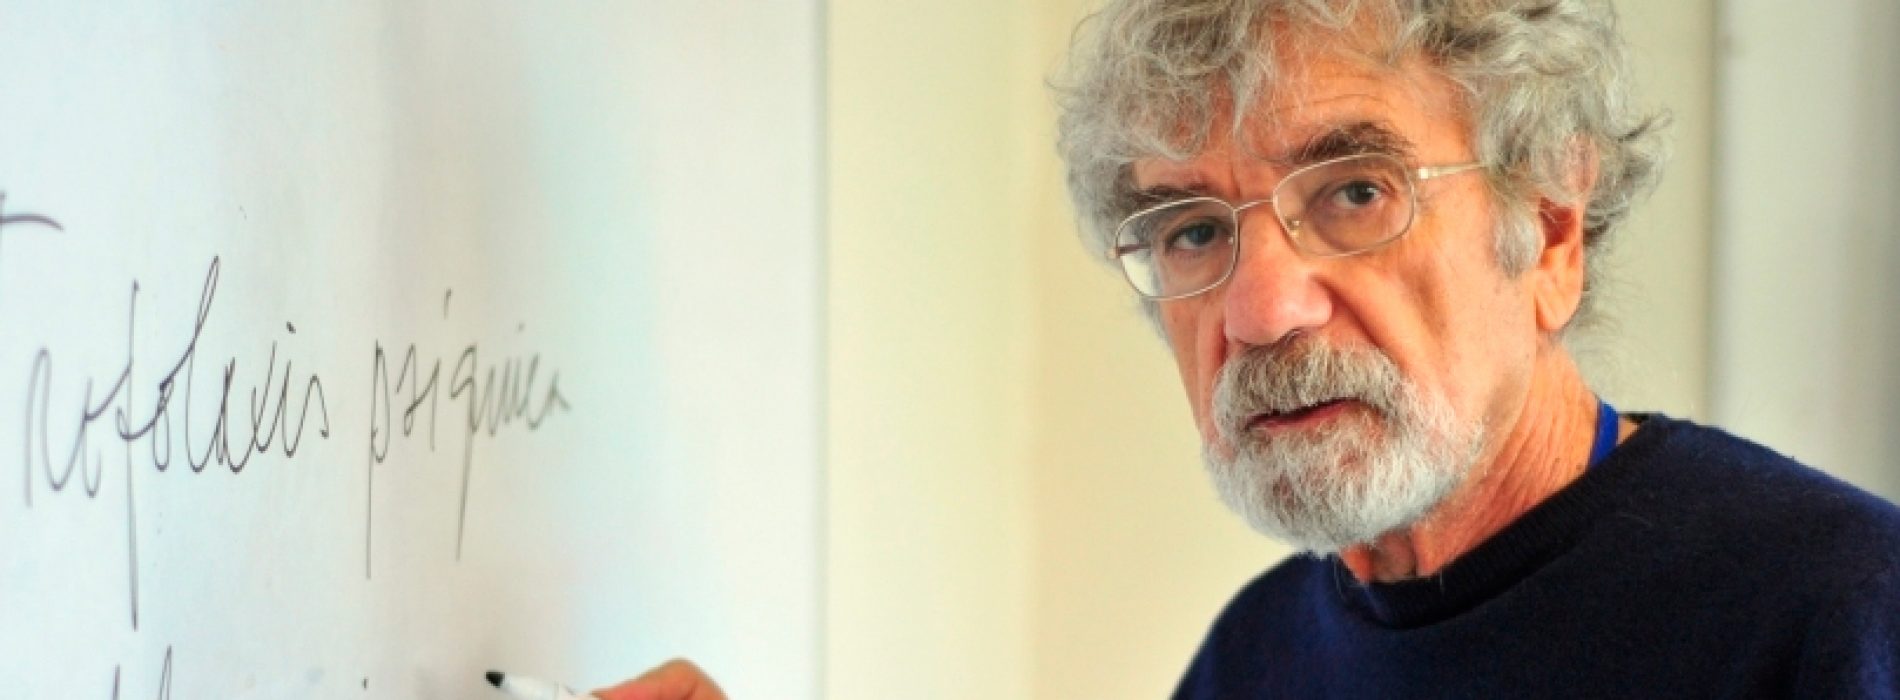 Humberto Maturana: "discrimination is founded on a theory that justifies denying each other"